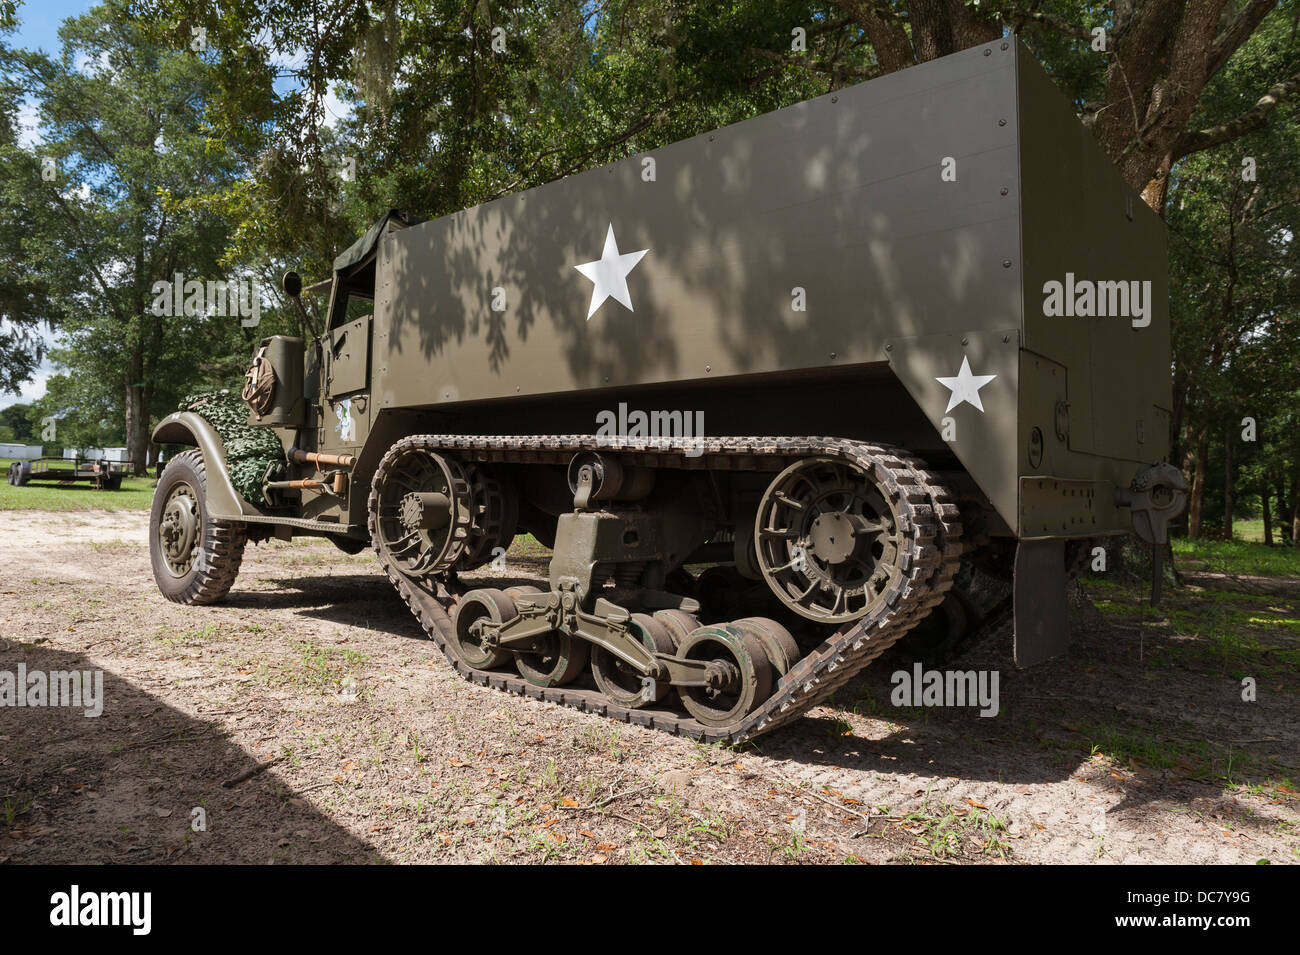 A 1943 M15 Halftrack military vehicle with a 50mm gun restored and being shown at a club meet in Central Florida USA. Stock Photo